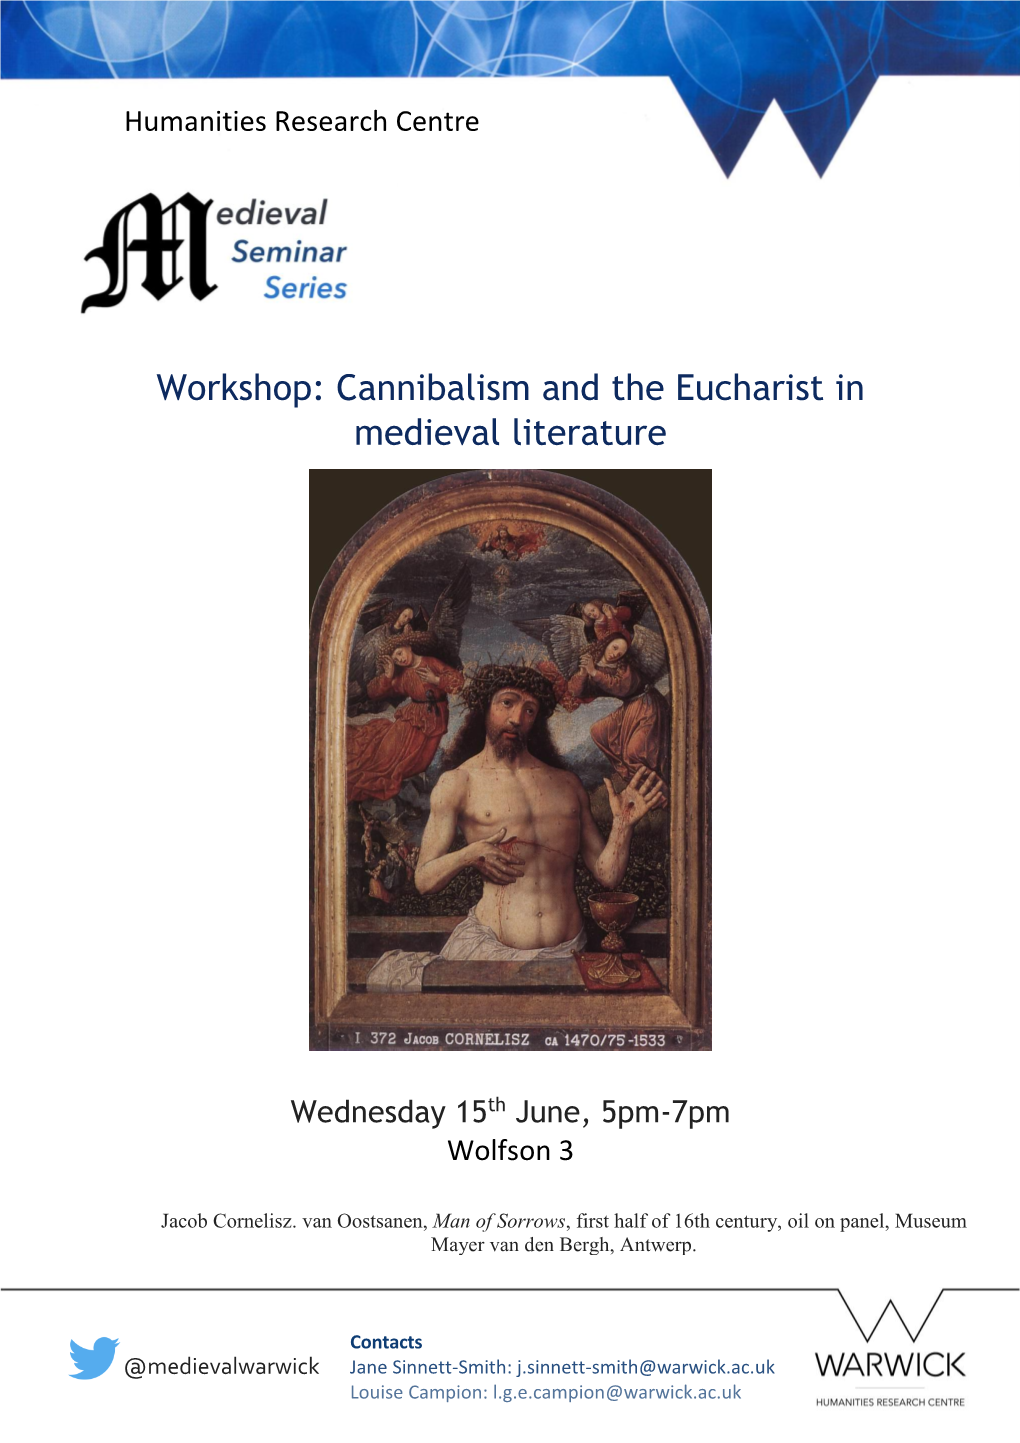 Workshop: Cannibalism and the Eucharist in Medieval Literature